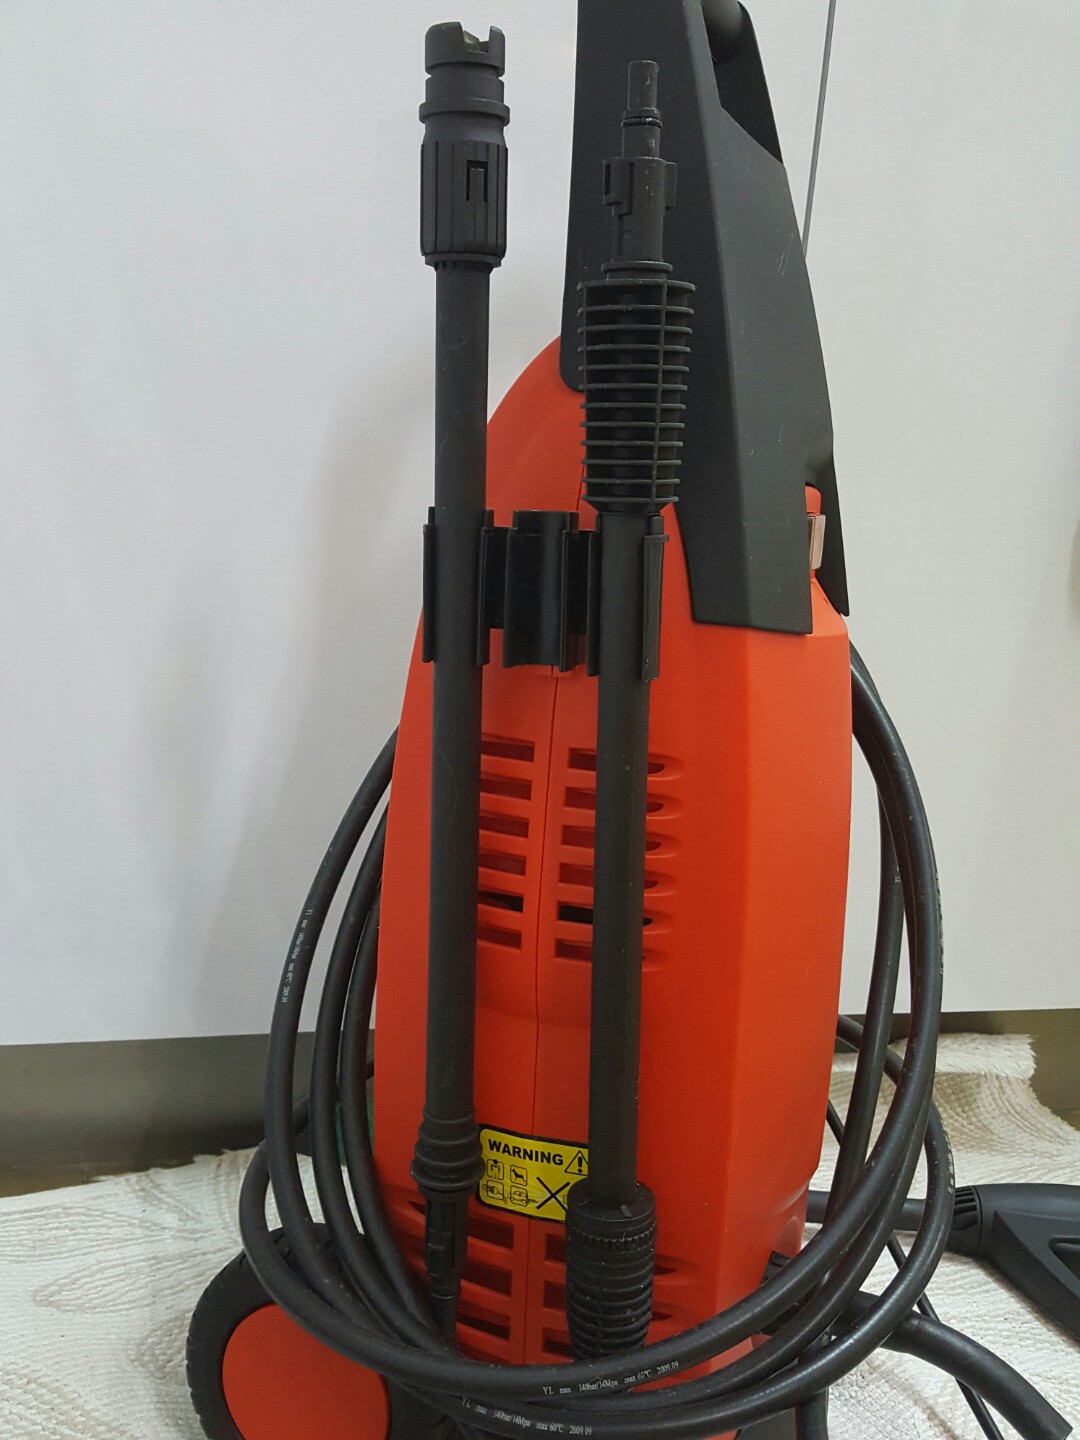 Unboxing Black and Decker PW1400 Pressure Washer (Quick Review